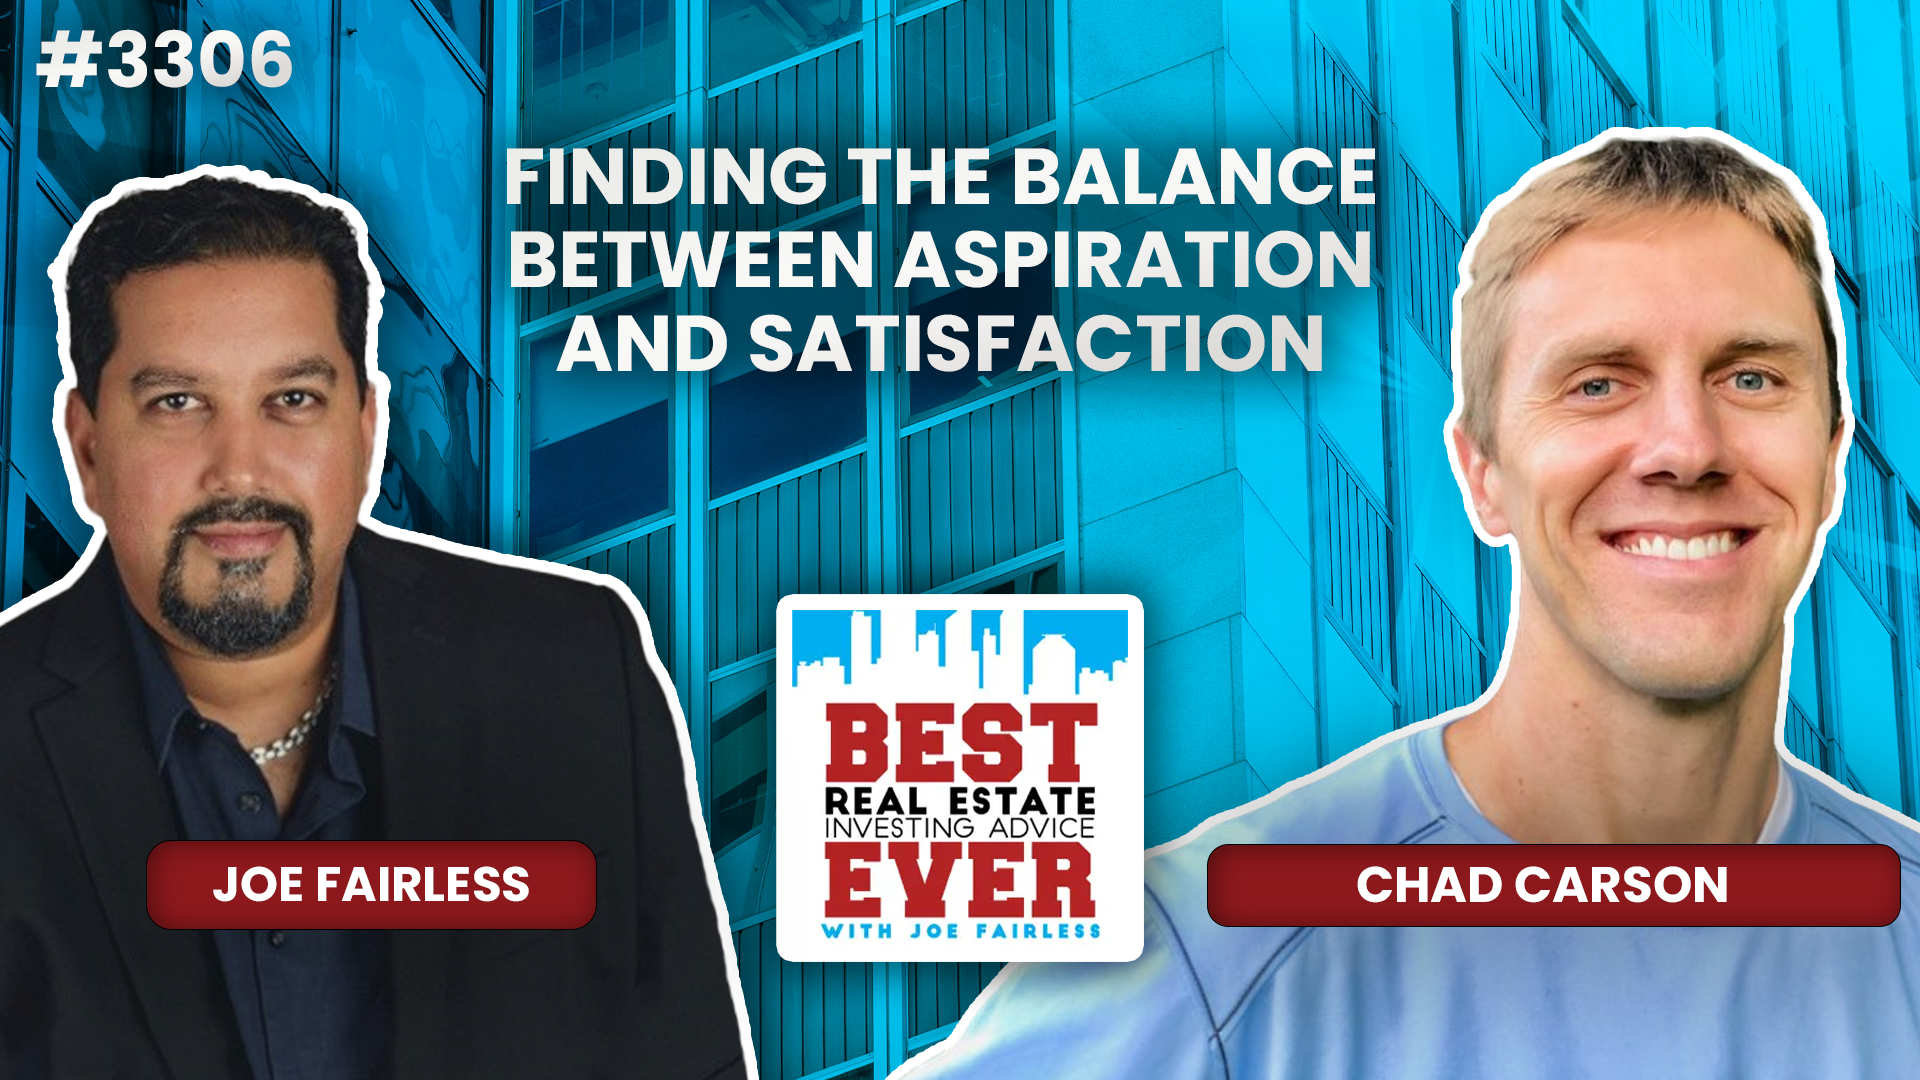 JF3306: Chad Carson - Finding the Balance Between Aspiration and Satisfaction